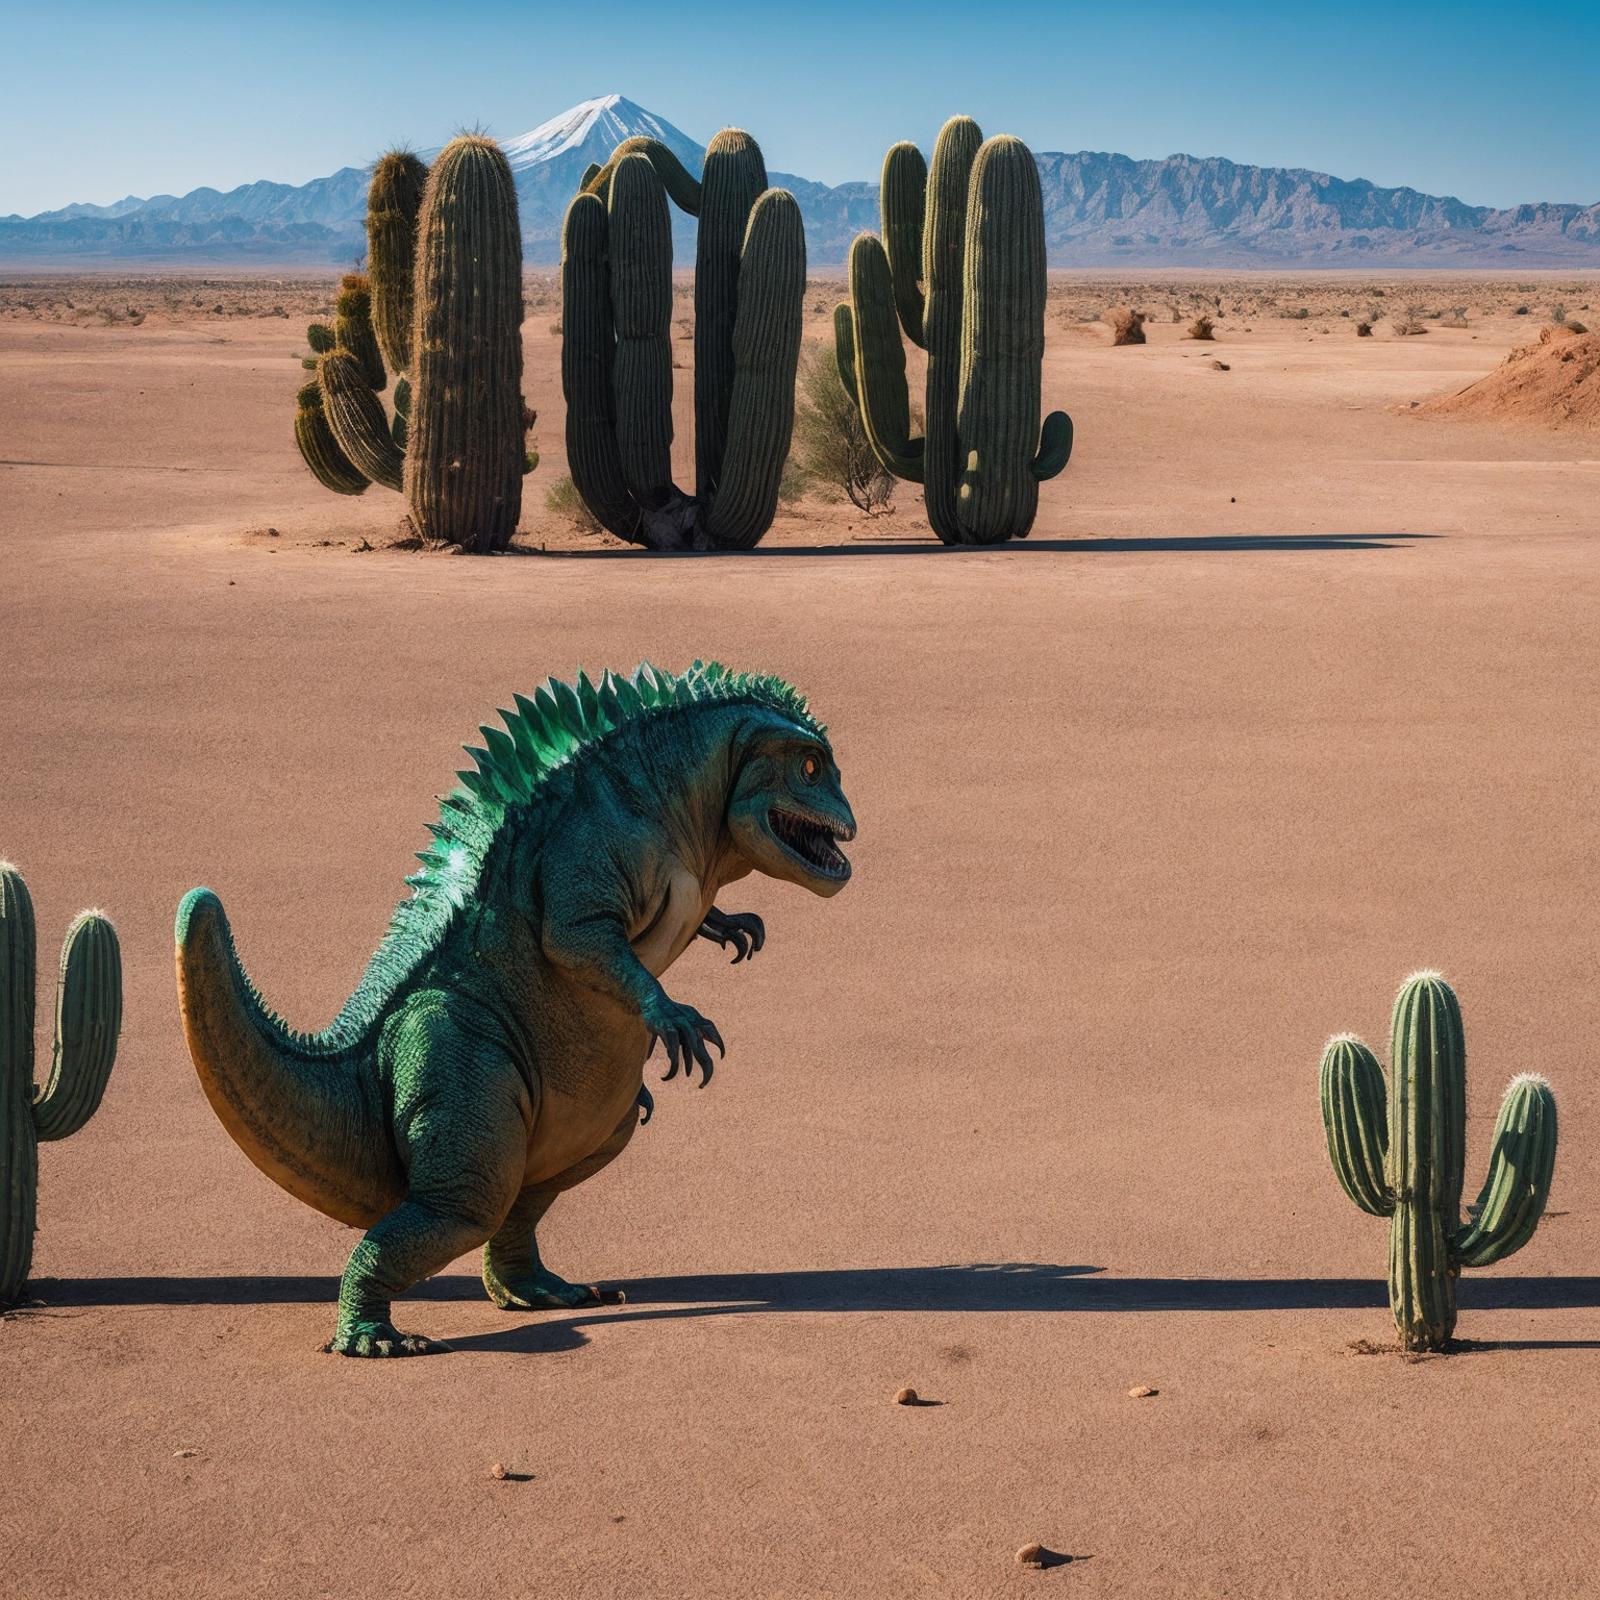 A dinosaur standing in a field of cacti.